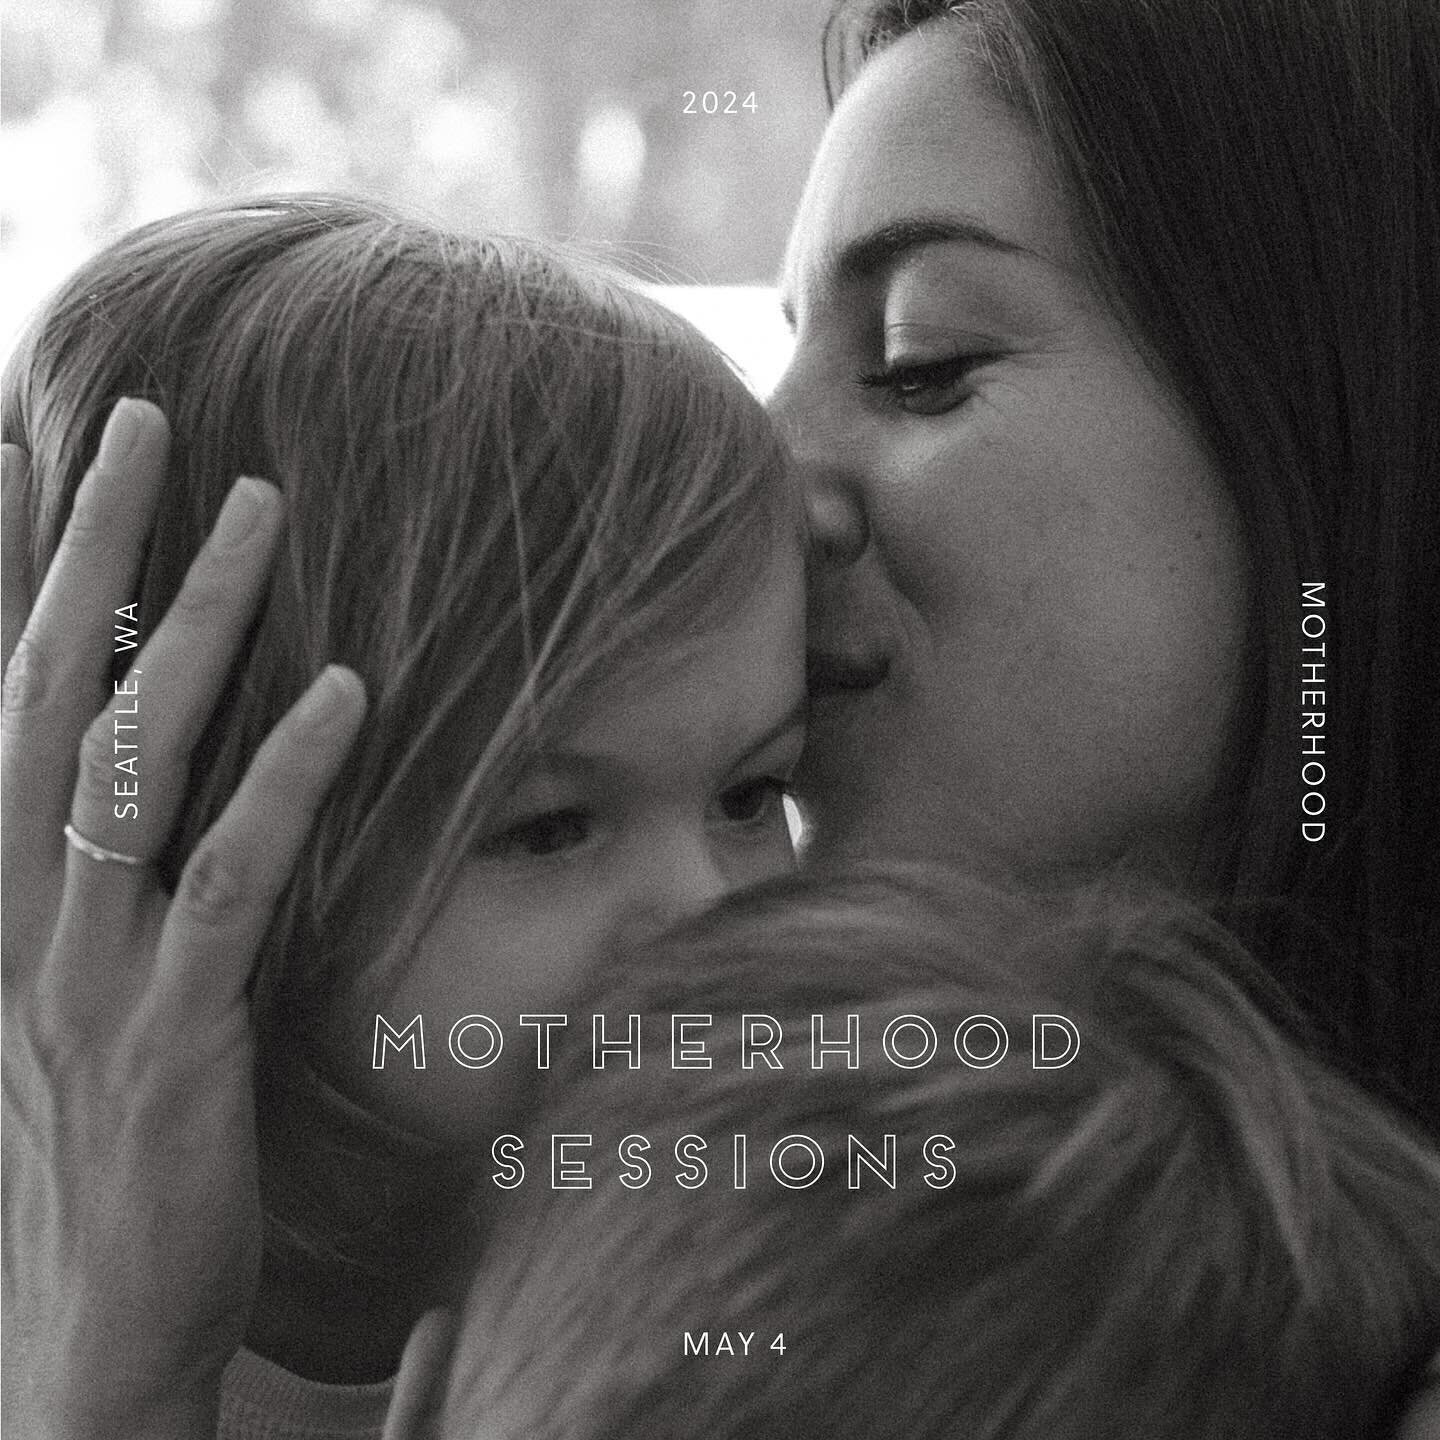 &mdash;&mdash;&mdash; MOTHERHOOD SESSIONS : MAY 4th, 2024

we&rsquo;re one month out from my annual motherhood sessions! Im so excited for this year&rsquo;s event! it&rsquo;s going to be hosted at a local Airbnb in West Seattle this time around :) we